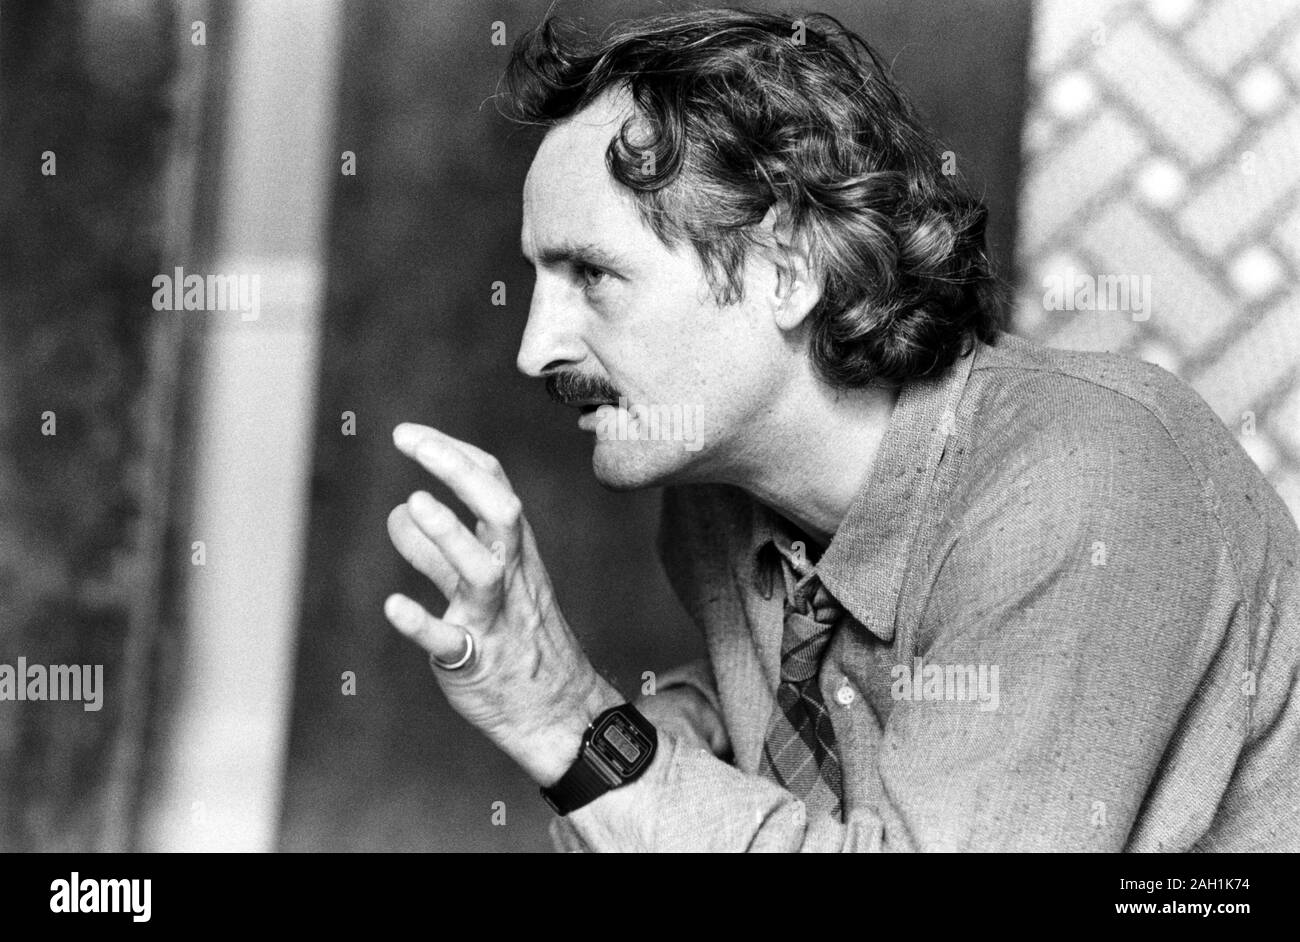 English stage director Max Stafford-Clark photographed in rehearsal in 1985. Born in Cambridge in 1941. Artistic Director of the Traverse Theatre, Edinburgh from 1968 to 1970, the Royal Court Theatre, London from 1979 to 1993 and Out of Joint touring theatre company from 1993 to 2017. Stock Photo